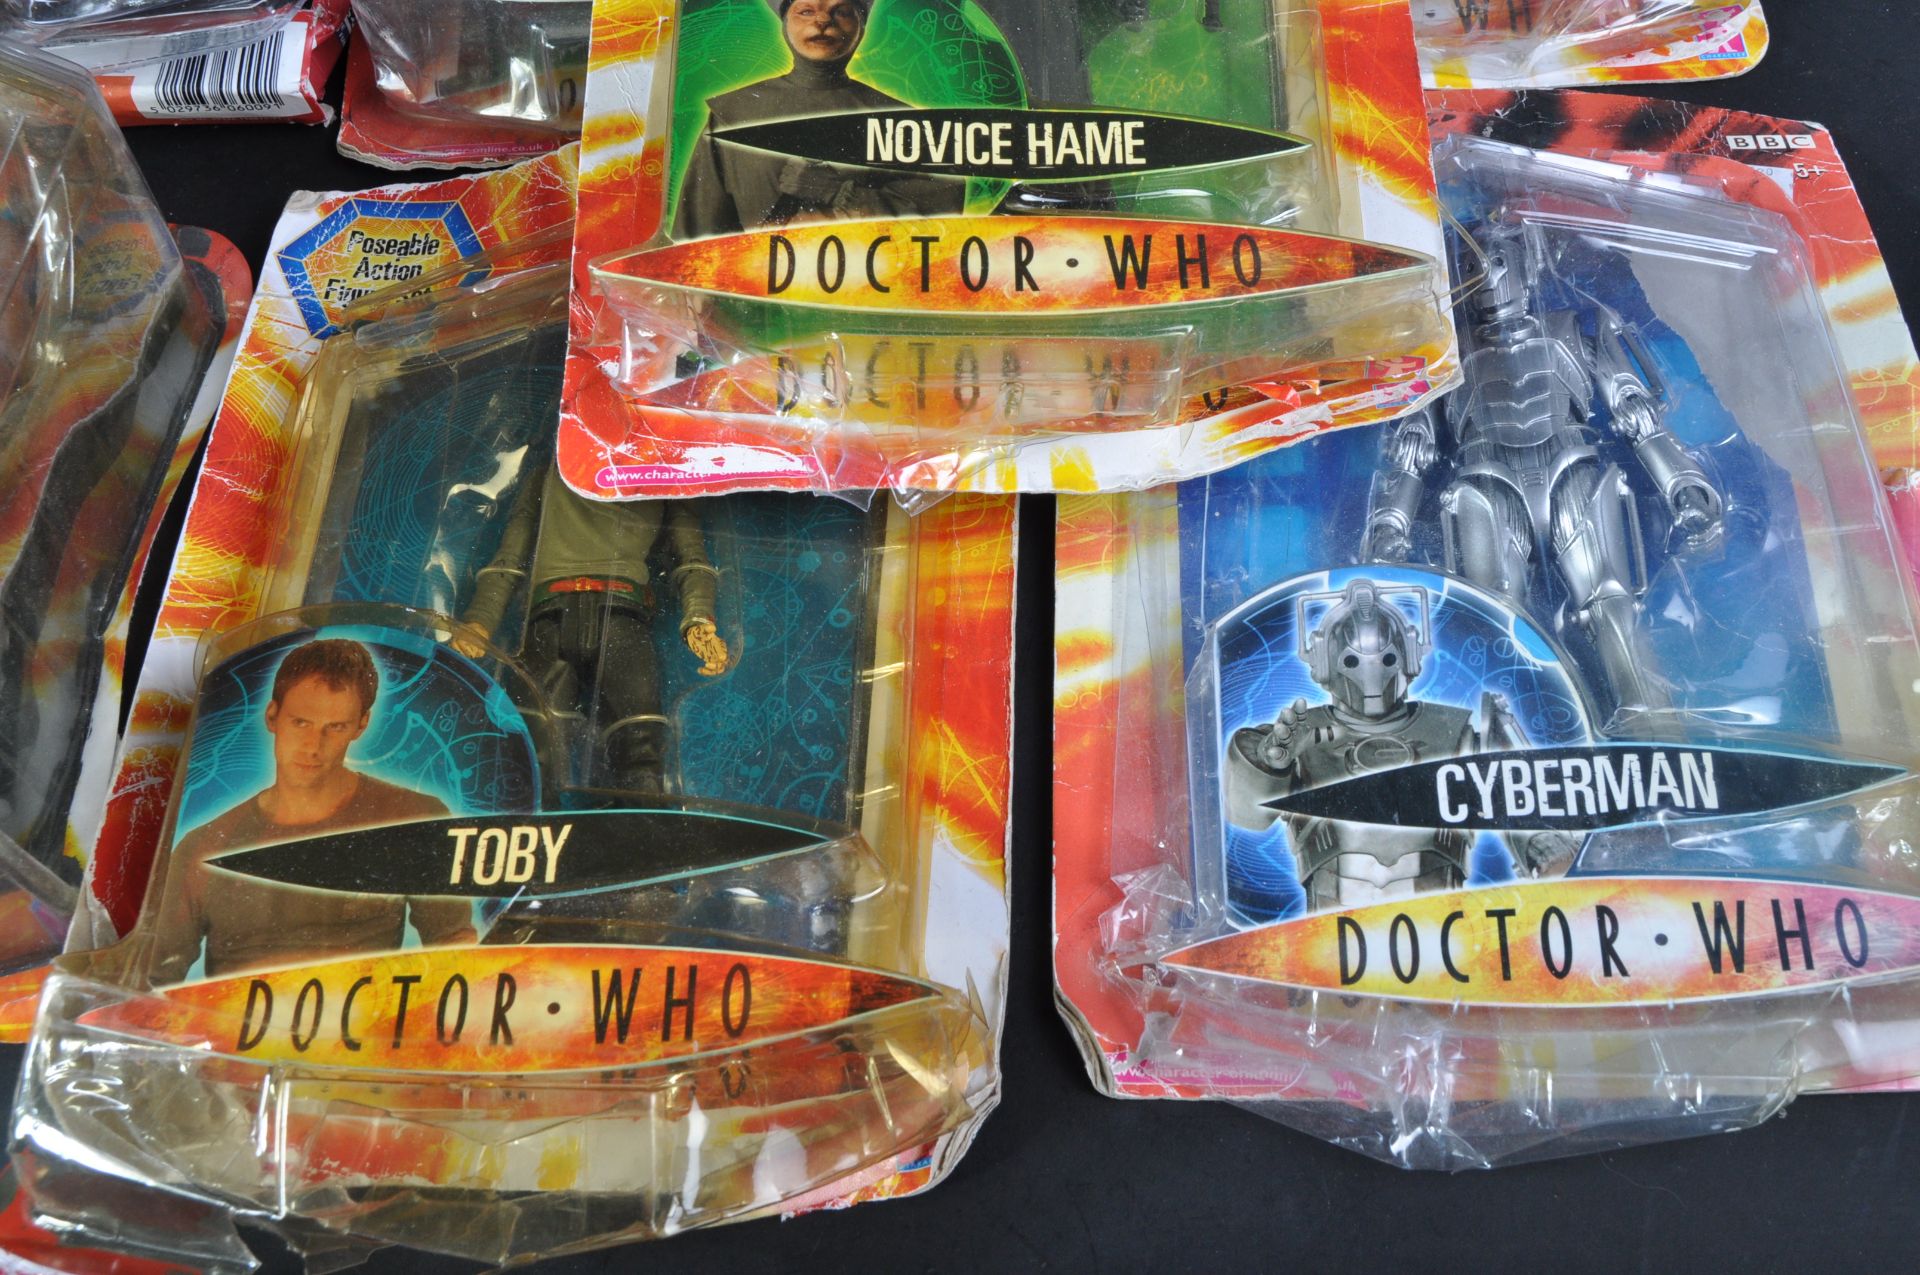 DOCTOR WHO - CHARACTER OPTIONS - COLLECTION OF ACTION FIGURES - Image 6 of 6